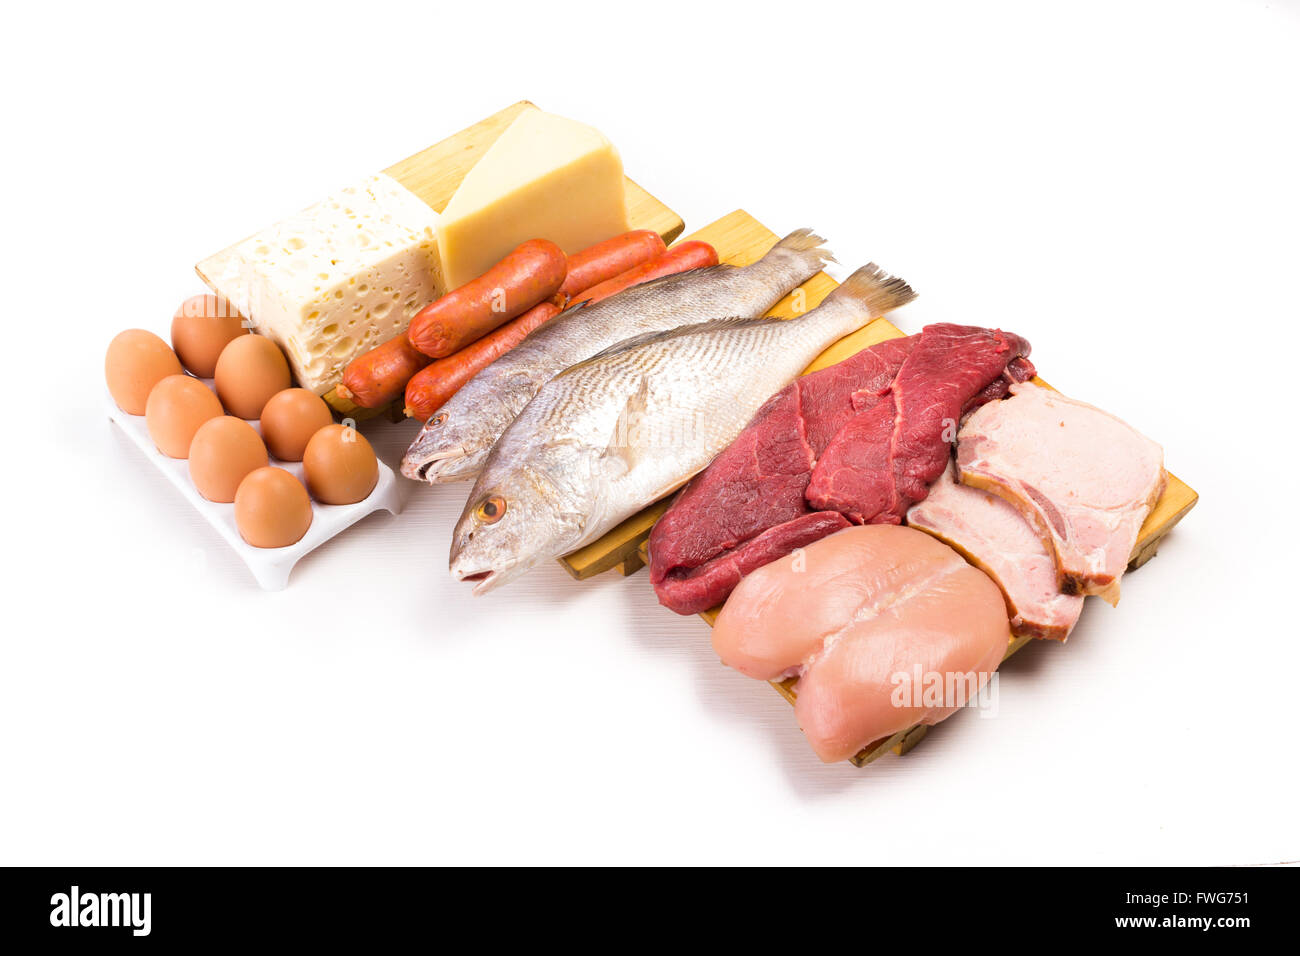 Group of important proteins, meats, fish, dairy, eggs, white meat on a white background, Shot from above Stock Photo